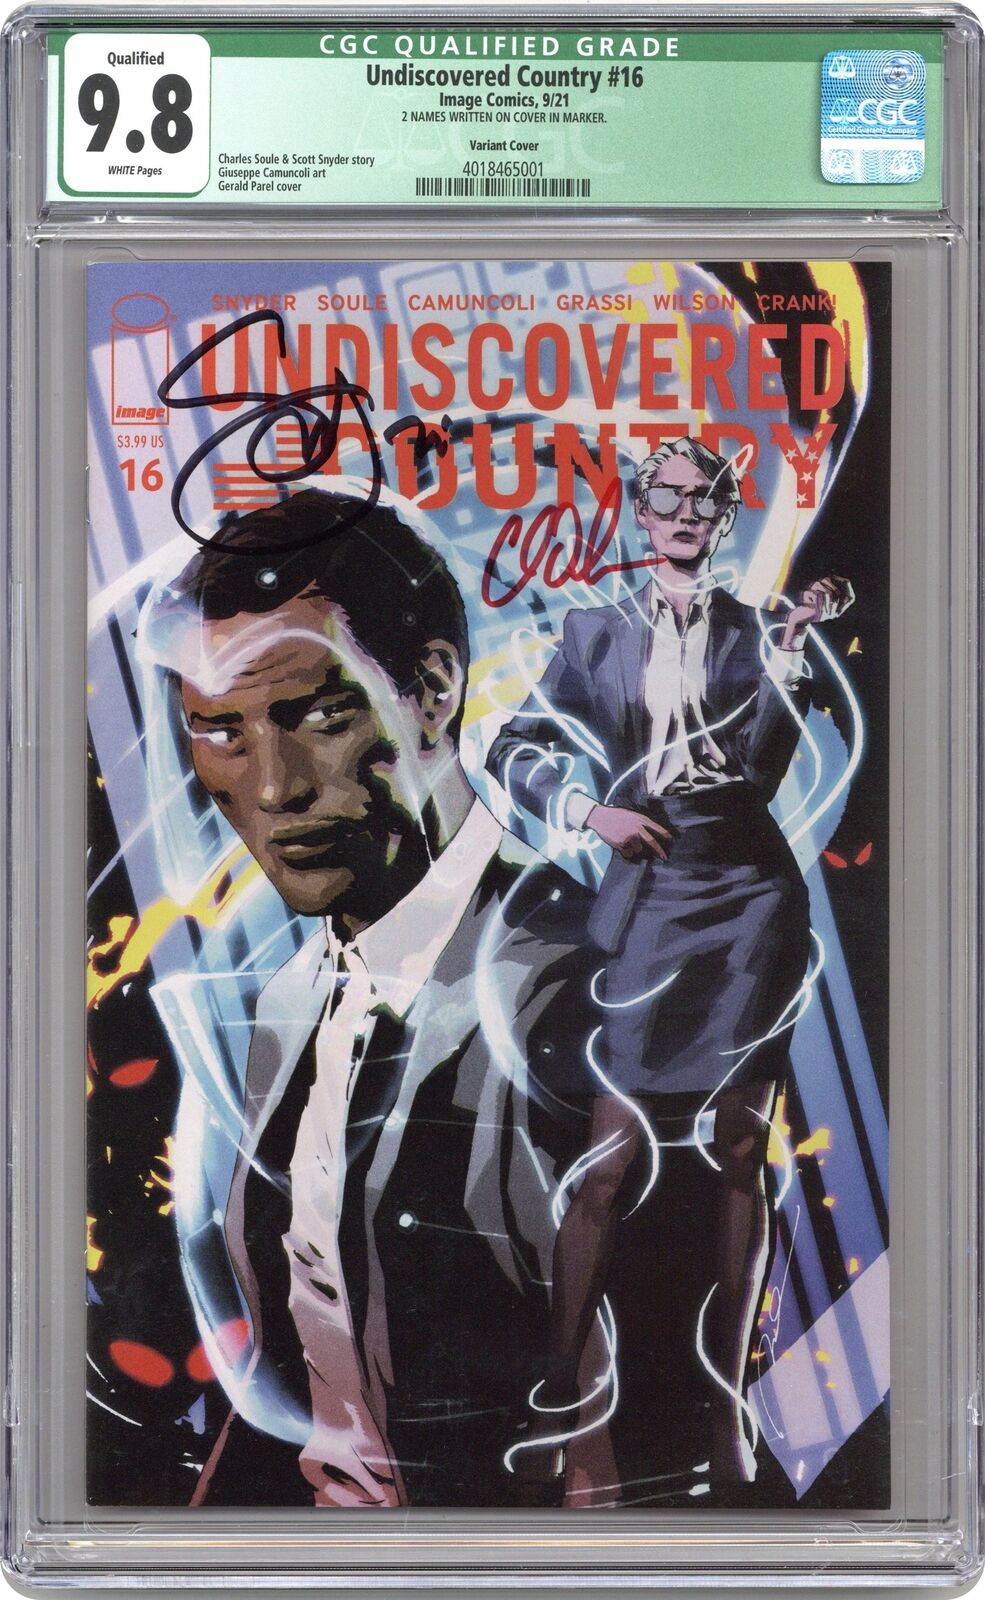 Undiscovered Country #16B Peral Variant CGC 9.8 QUALIFIED 2021 4018465001